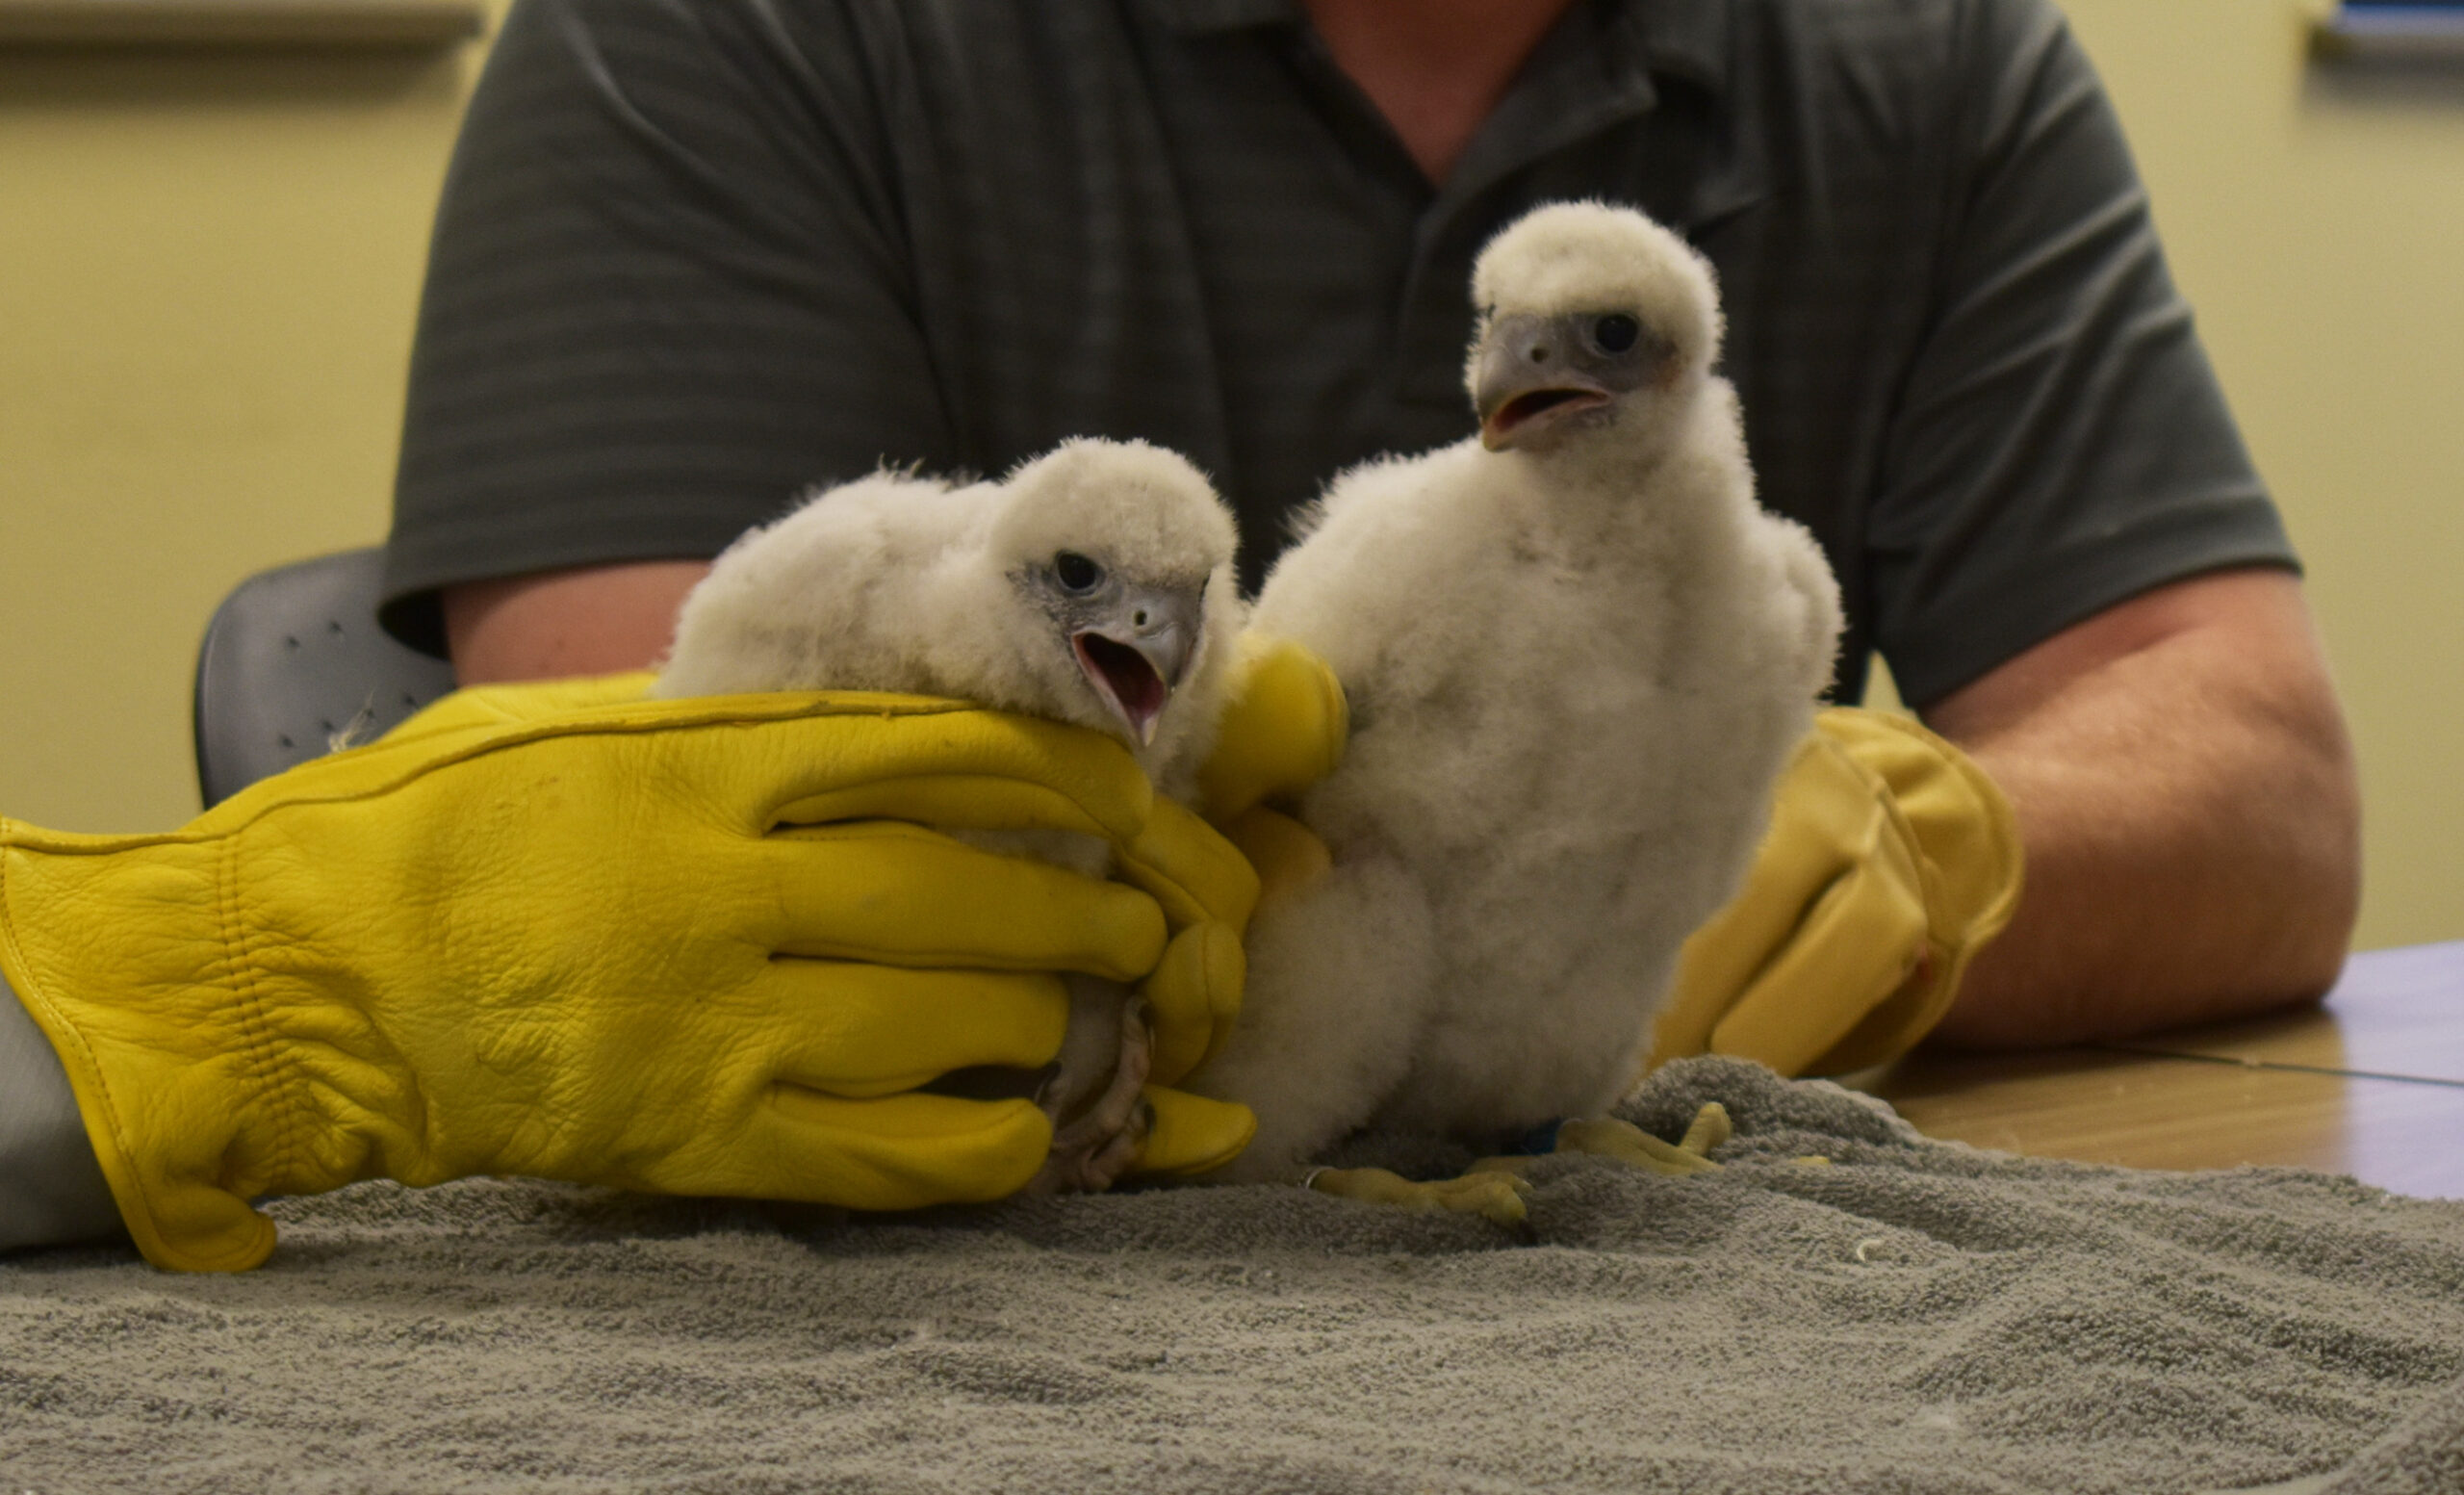 Researchers hold peregrine falcon chicks Dream, left, and Scrunchie after applying leg-bands to them.